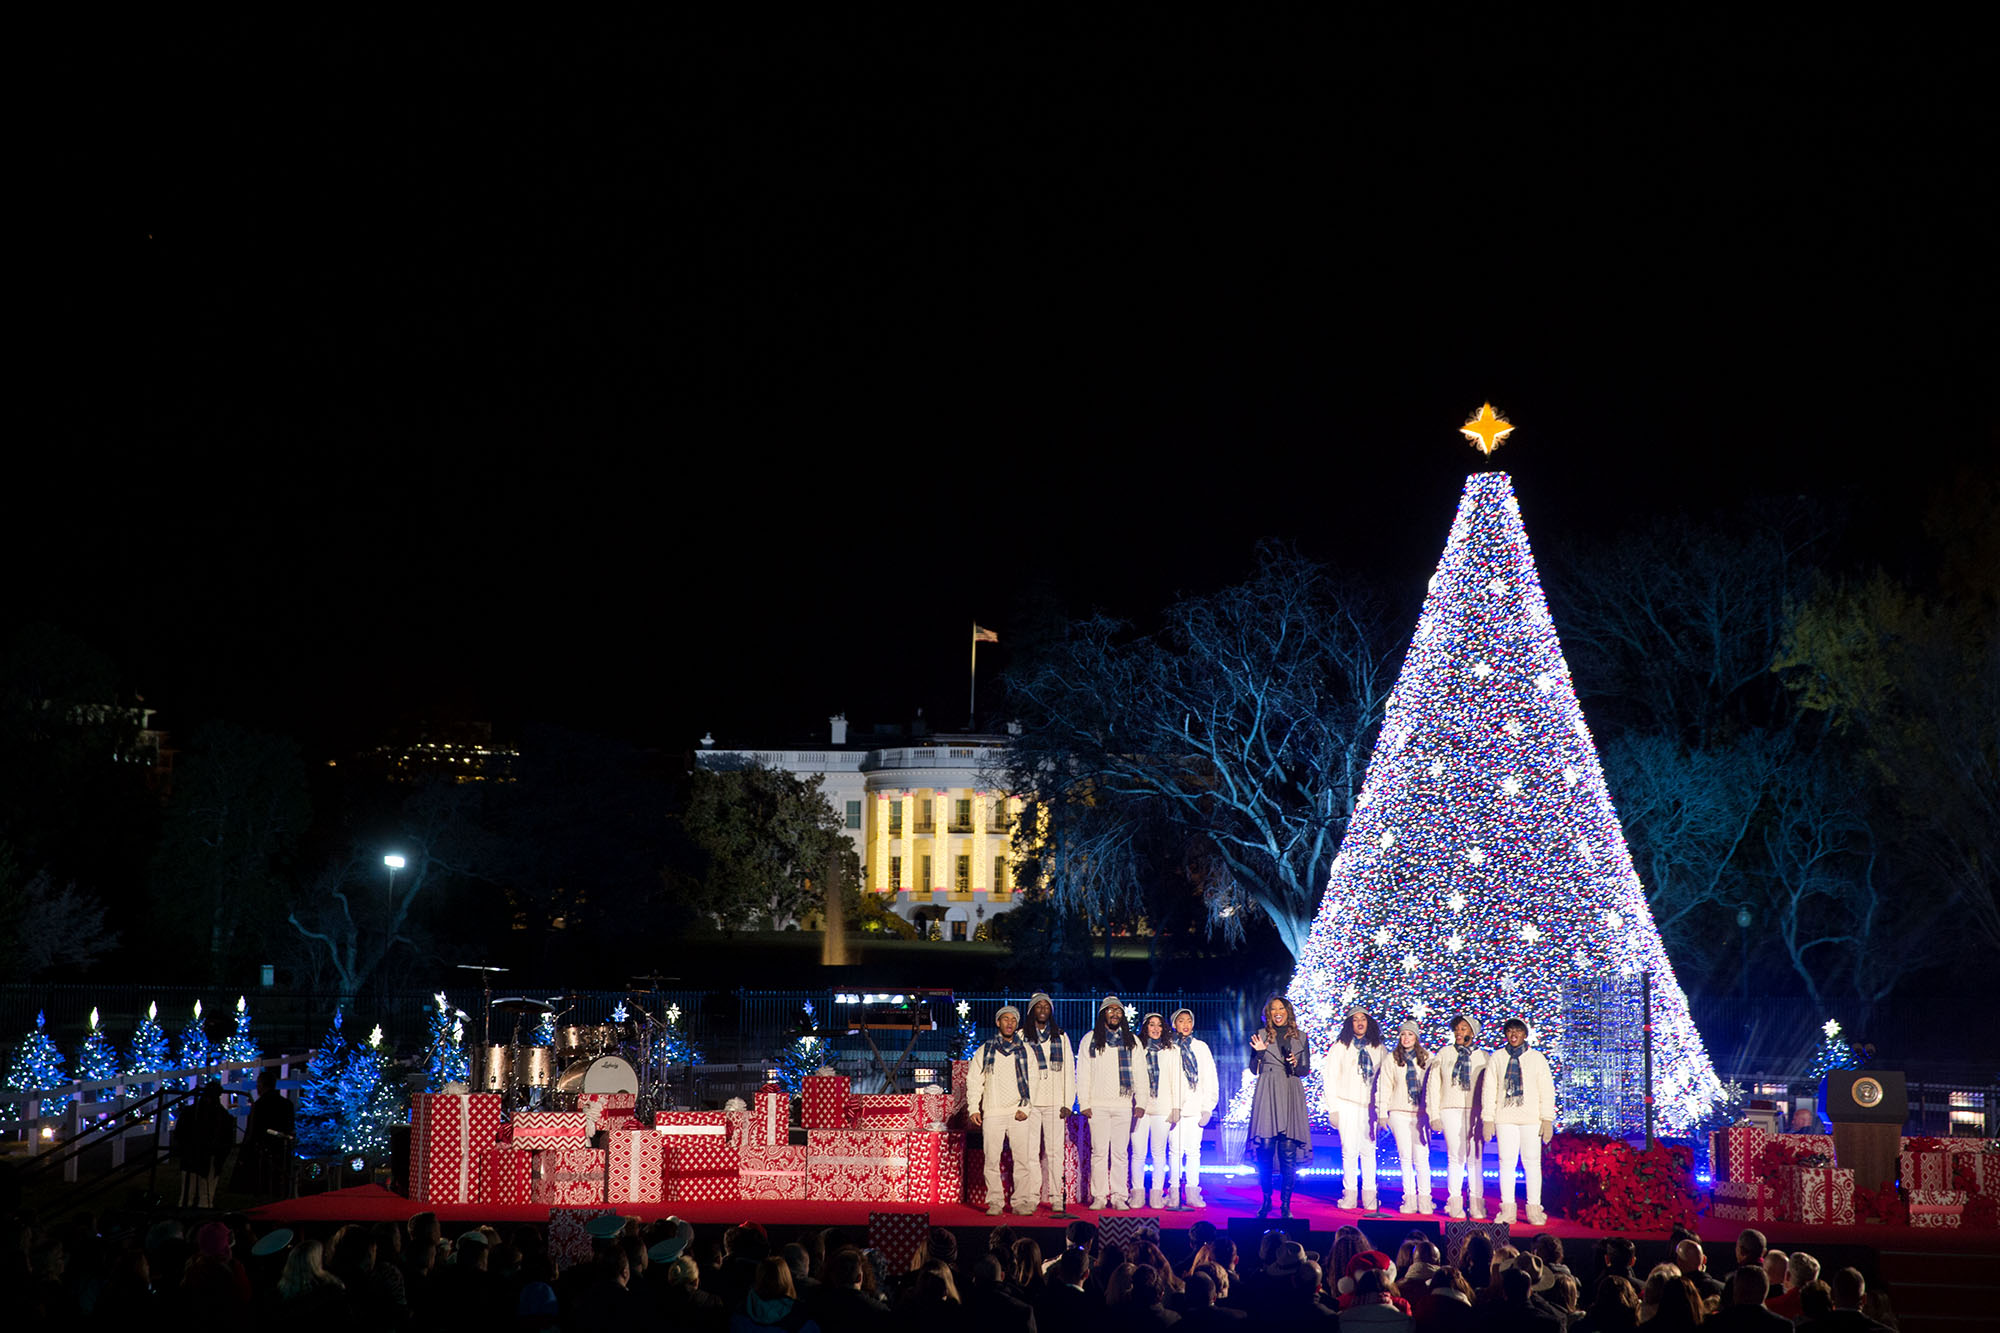 Yolanda Adams performs during the National Christmas Tree lighting on the Ellipse in Washington, D.C., Dec. 1, 2016. (Official White House Photo by Lawrence Jackson)